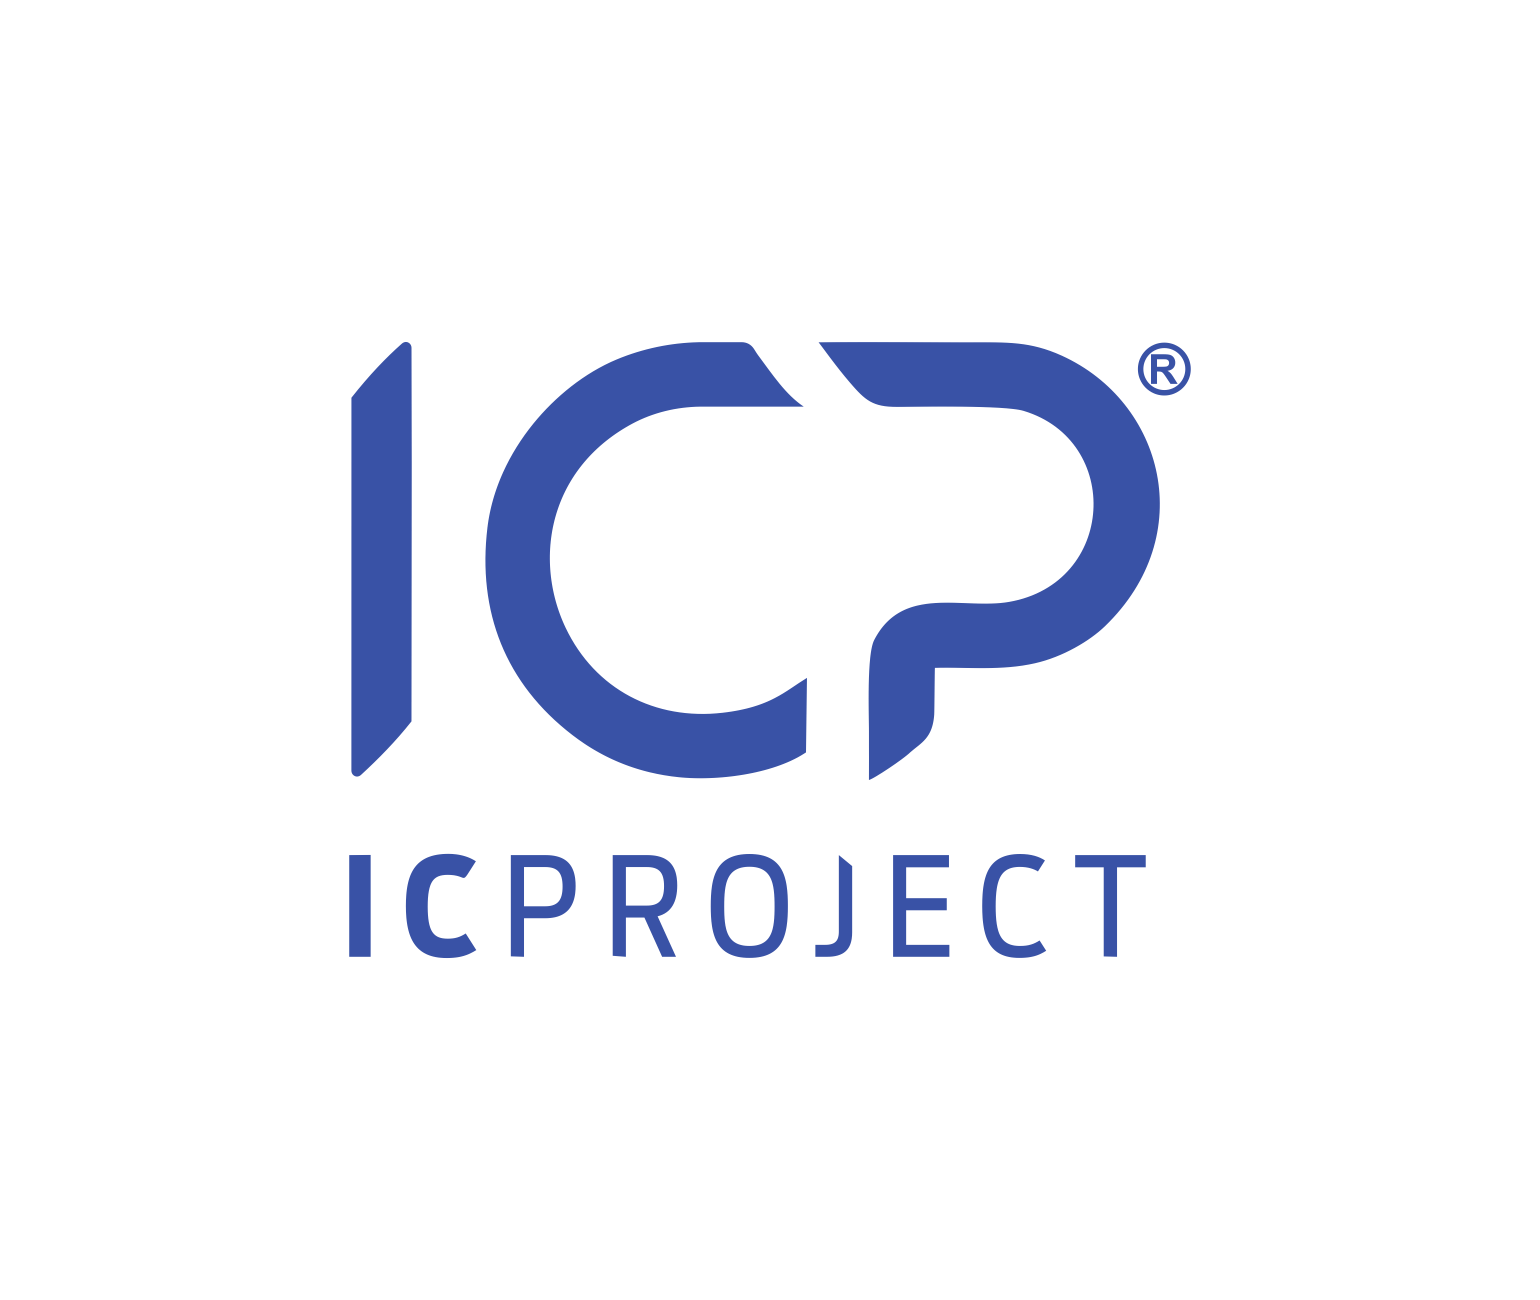 IC PROJECT